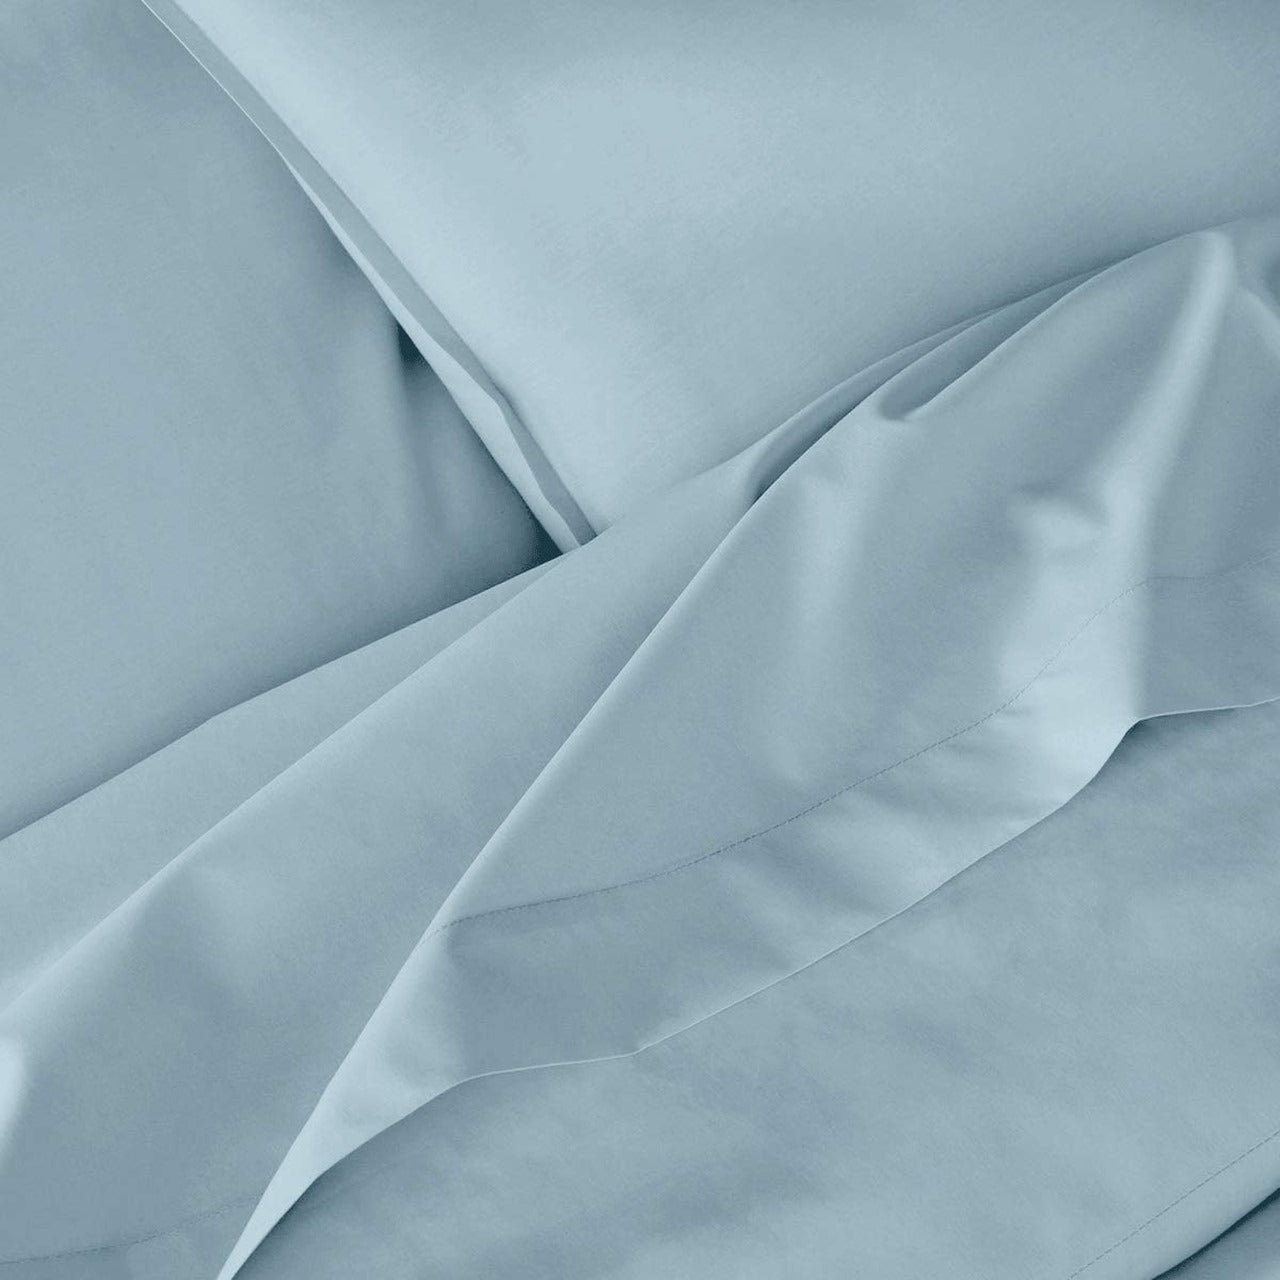 EUQIFAH Cotton Percale Bed Sheet Set - 4 Pieces - Cool, Breathable, Durable - Fade & Shrink Resistant, Hypoallergenic - Luxurious Comfort Bedding (Aquamarine)